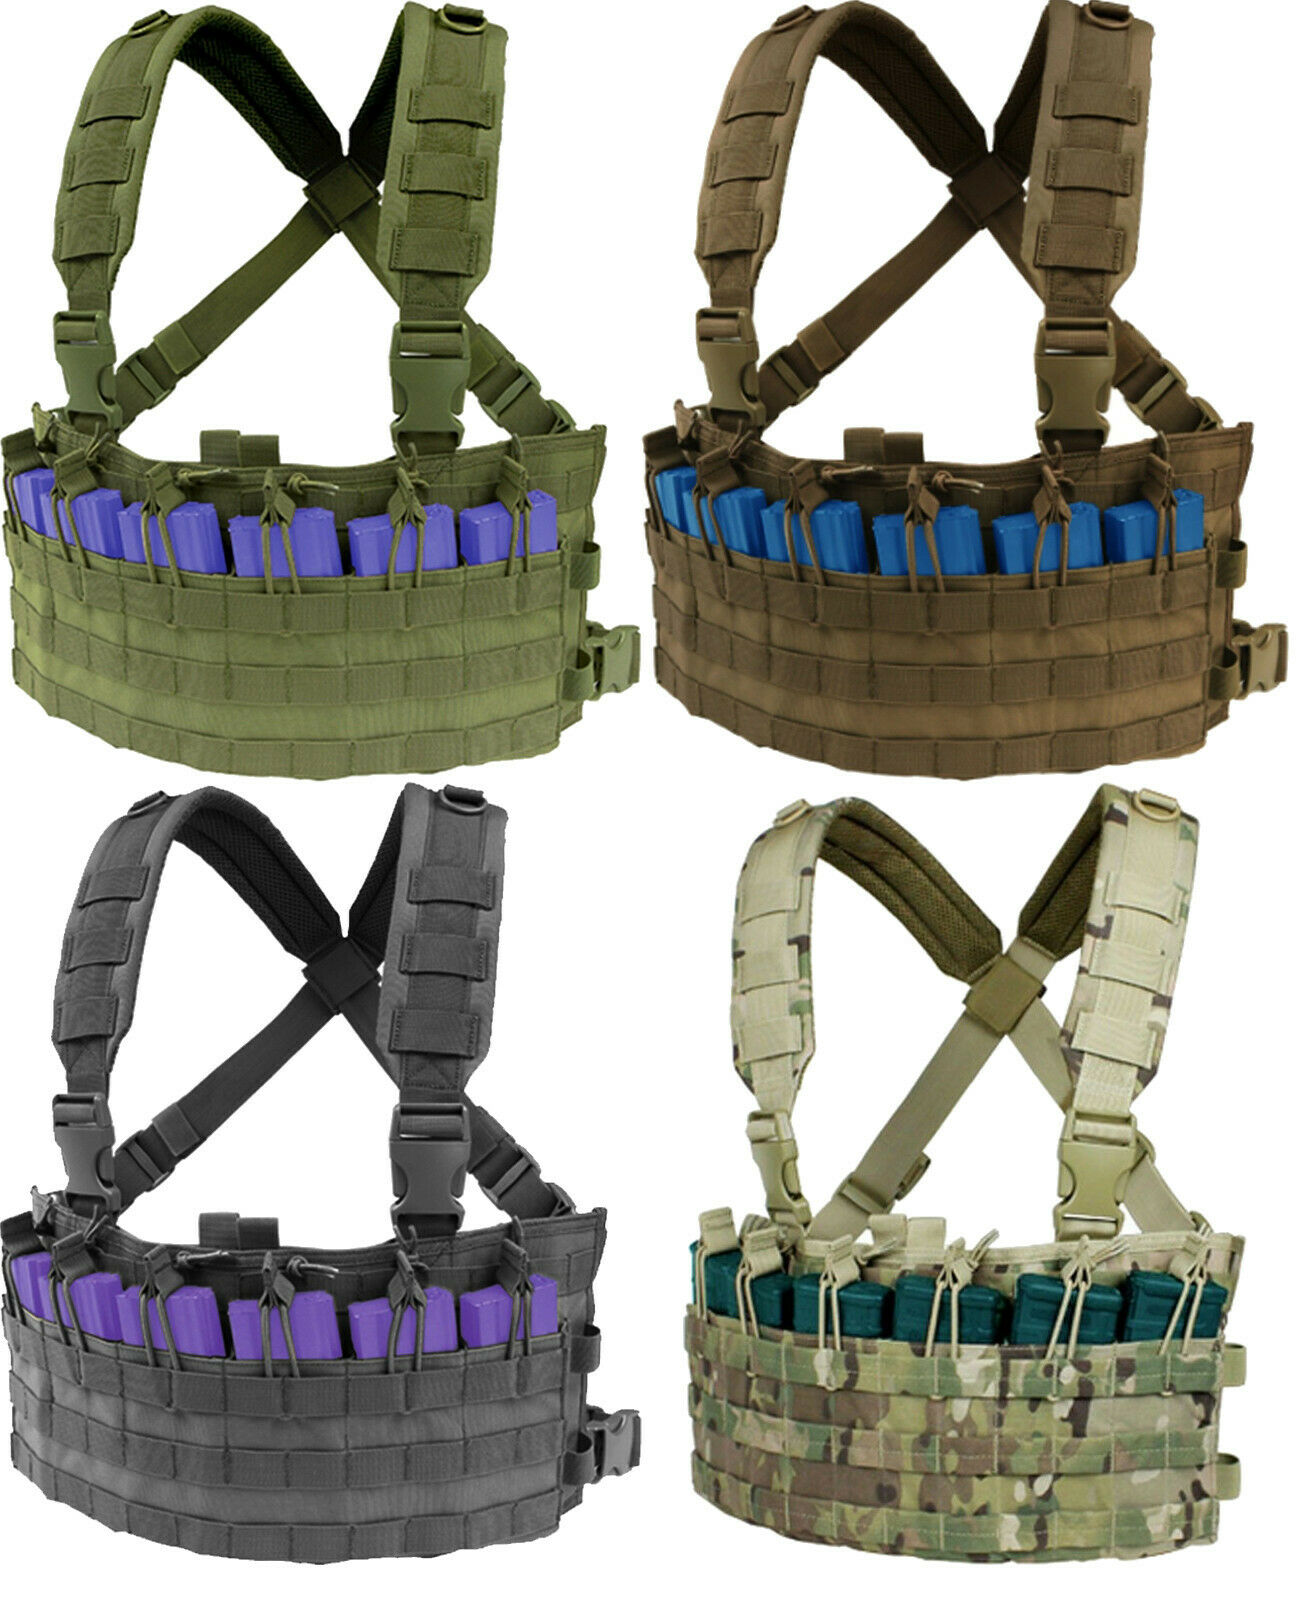 Condor Mcr6 Rapid Hunting Modular Chest Rig 5.56 .223 Molle Pals Magazine Pouch